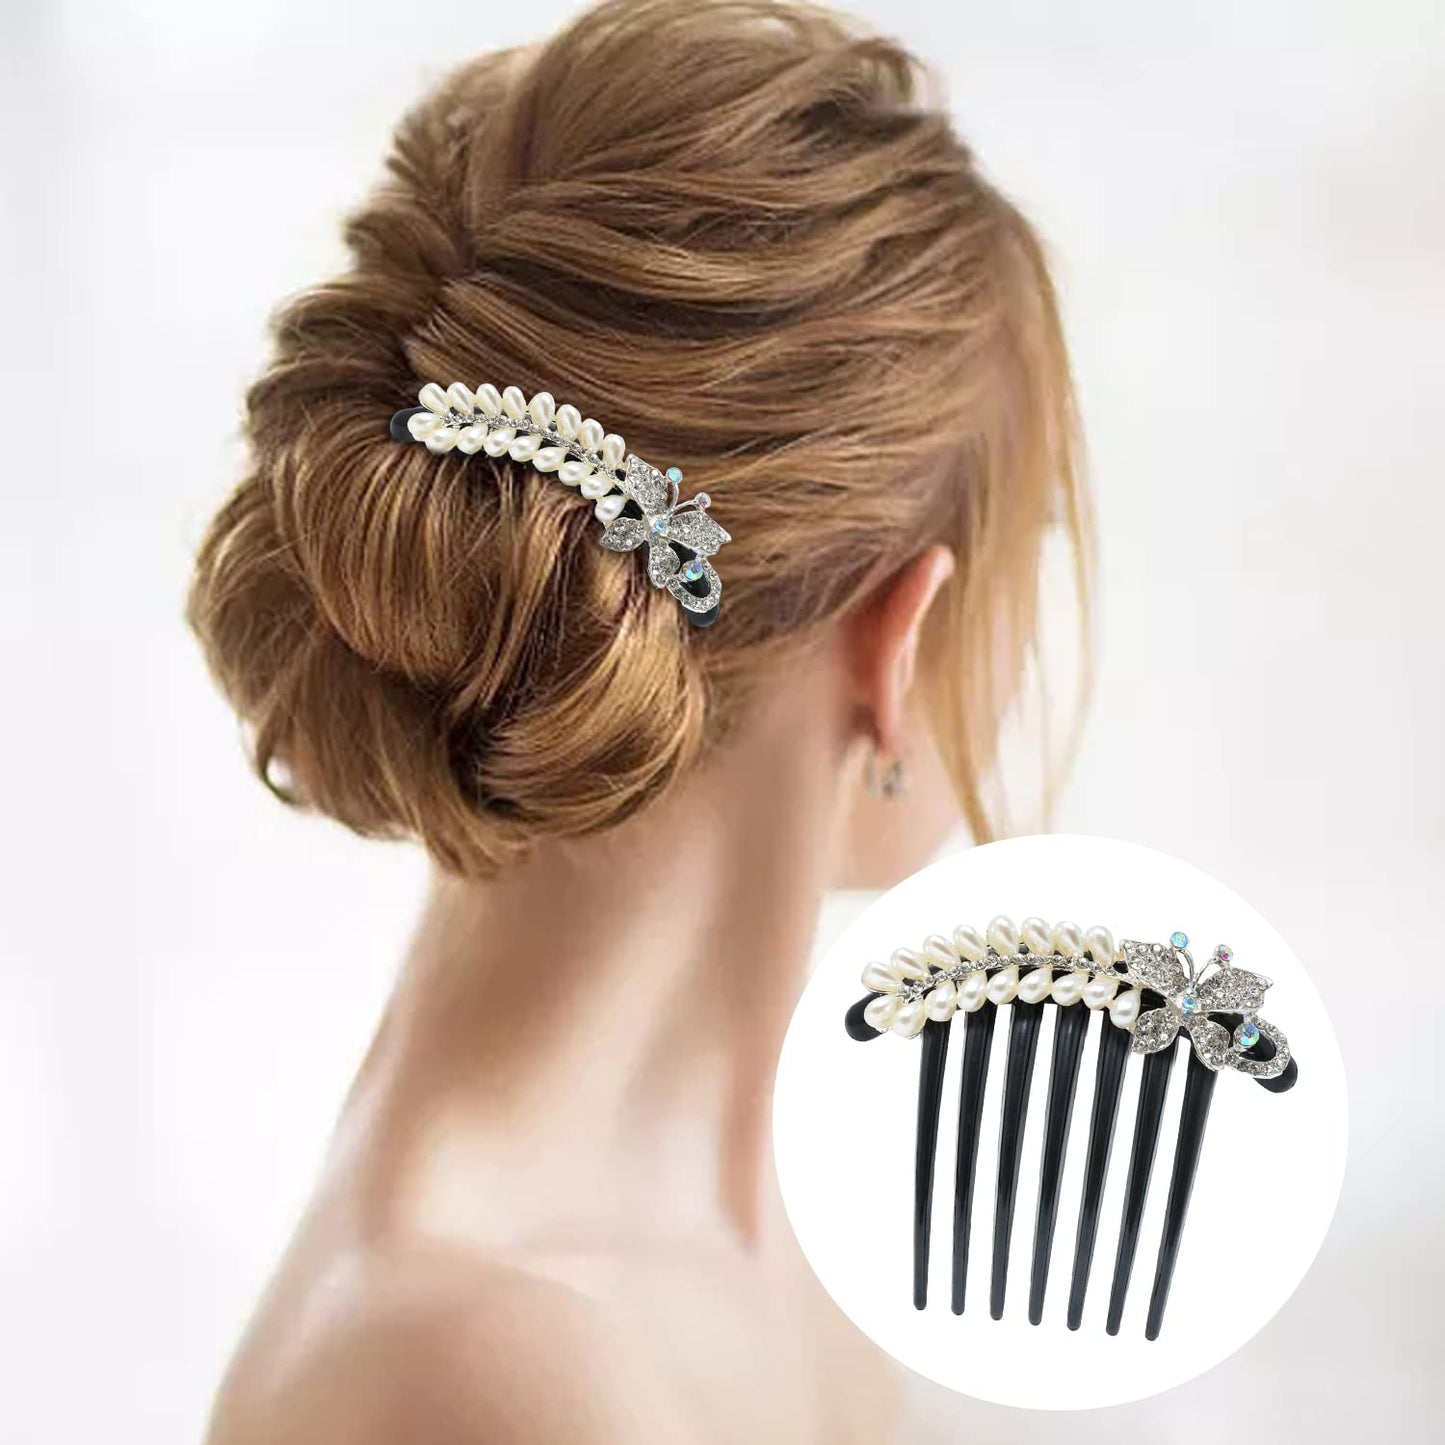 Honbay 2PCS 7 Teeth Hair Side Combs Pearl Crystal Rhinestone Floral Twist Combs Rhinestone Flower Hairpin Decorative Hair Combs Accessories for Women (2 Style)